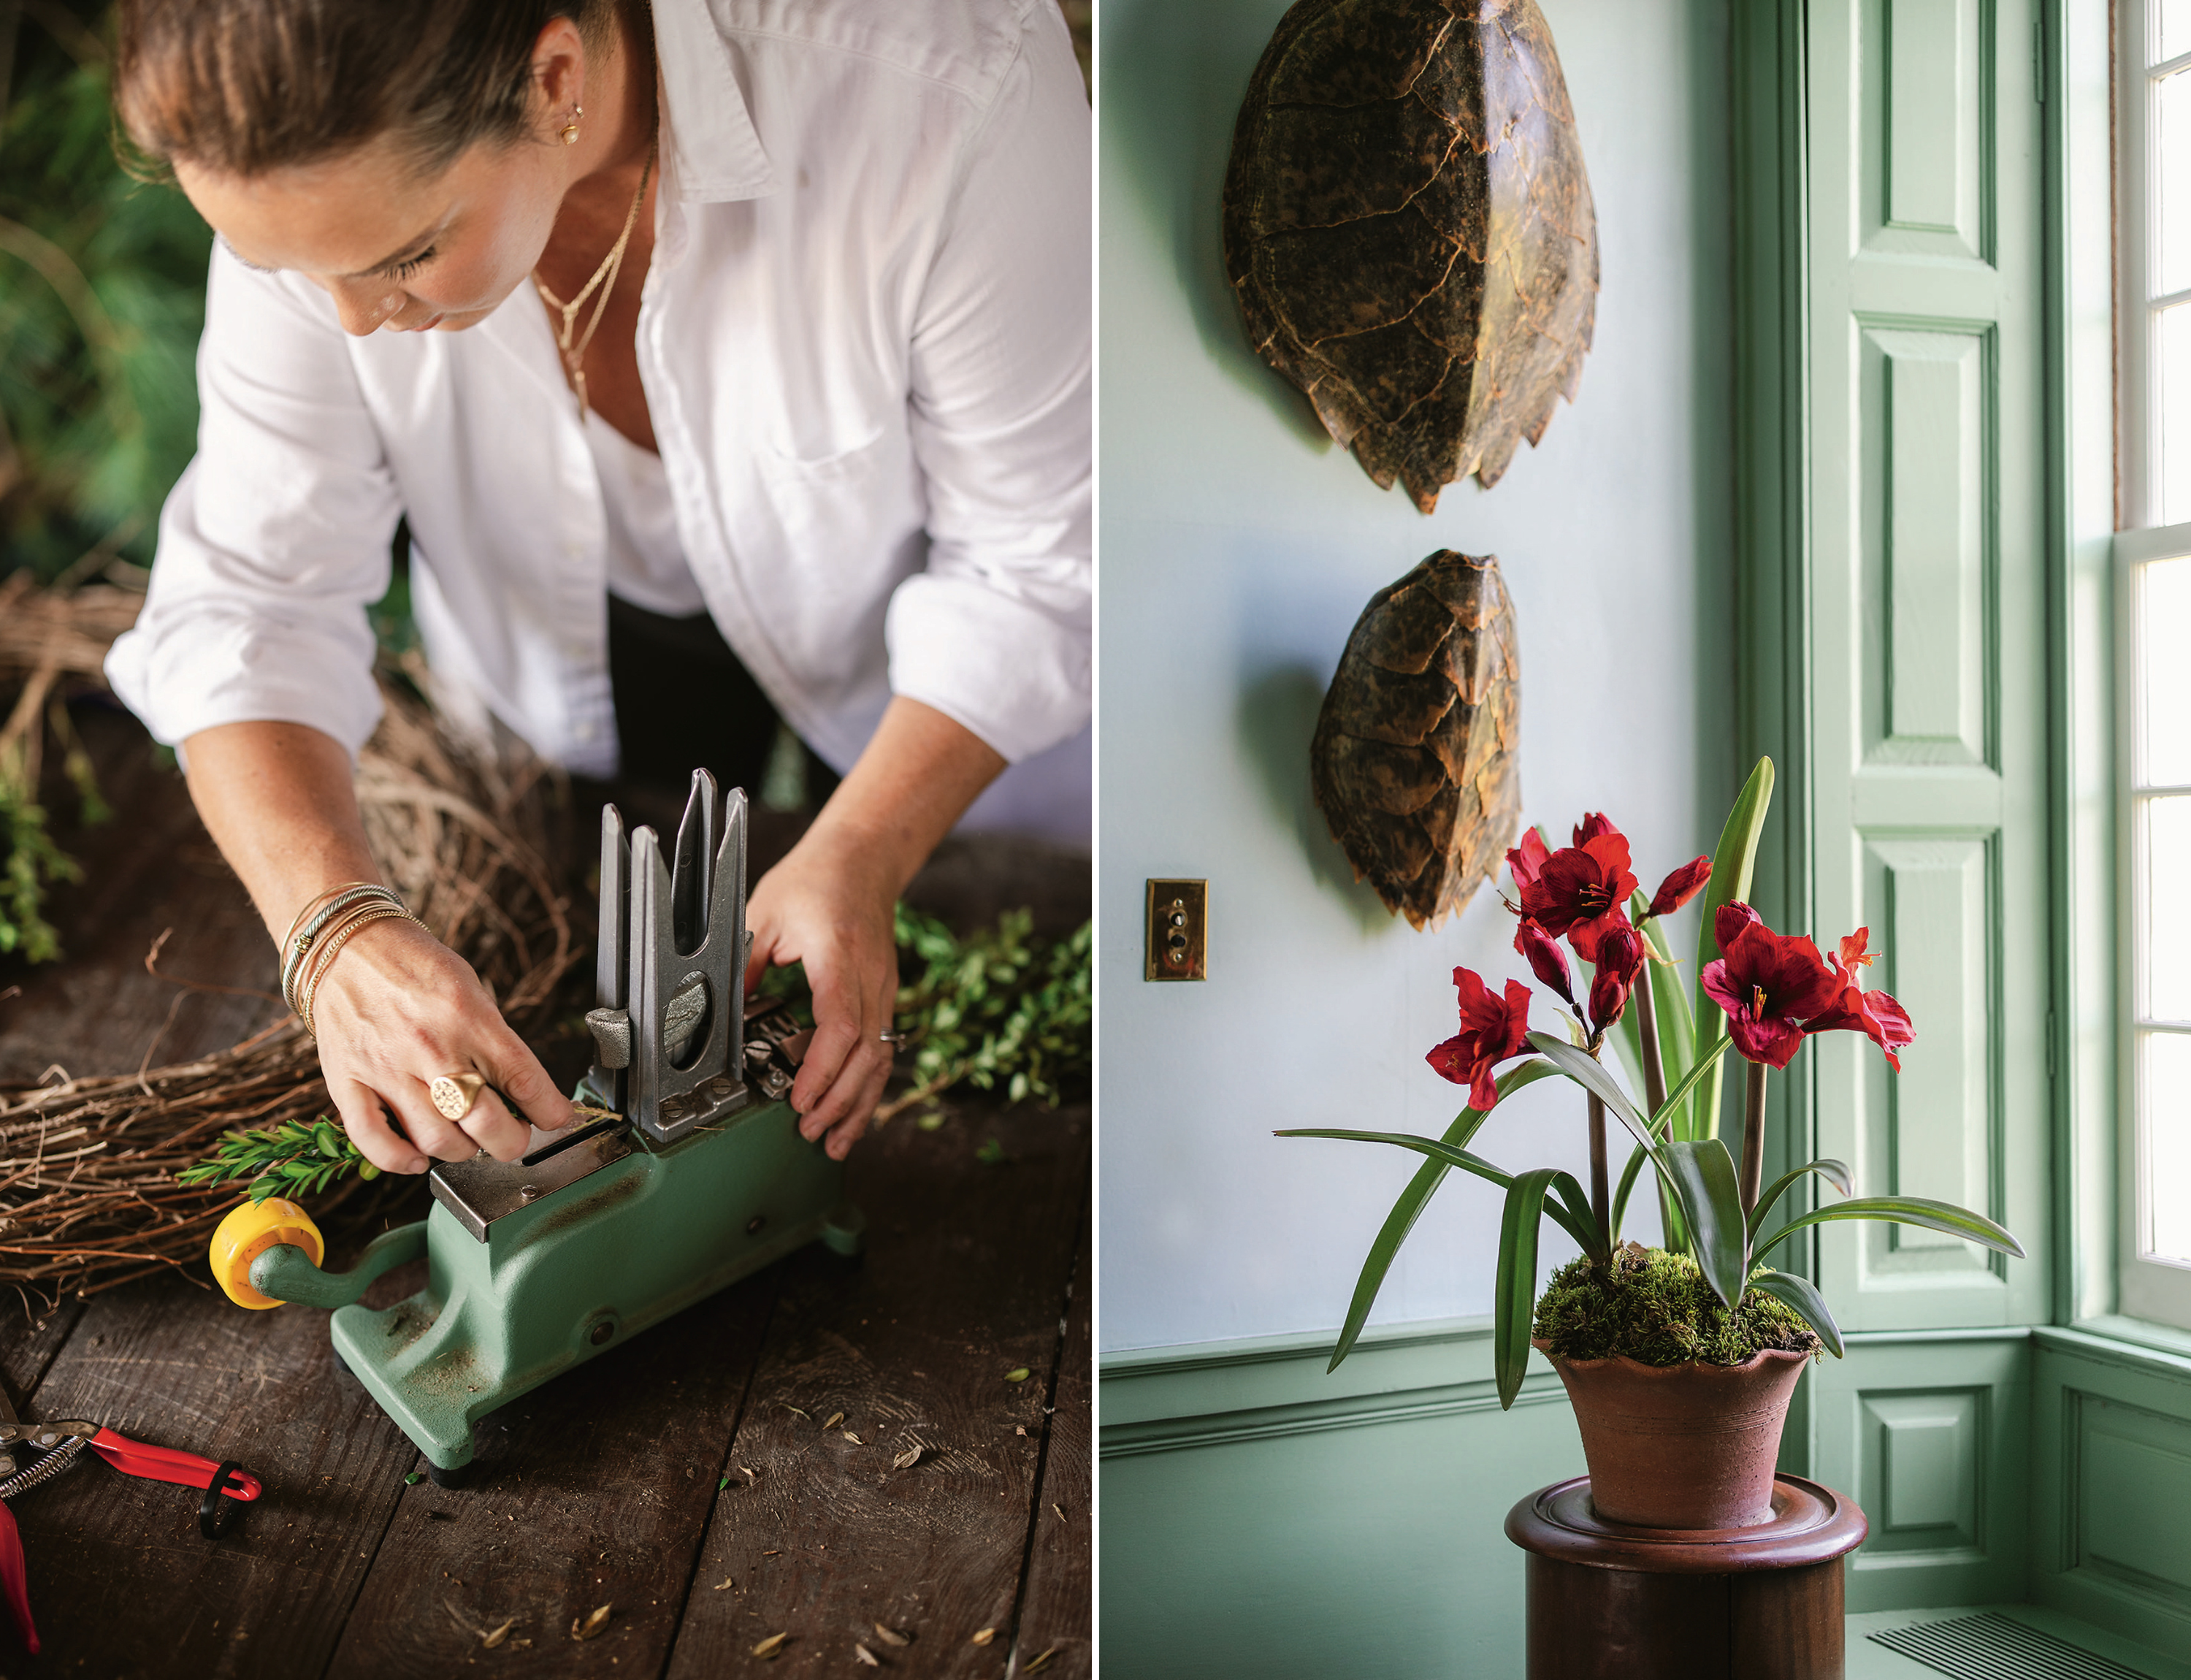 A collage of two images. Left: A woman presses a green vintage sewing machine on boxwood and cedar sprigs on a wood table. Right: A red flower in a wavy-rimmed clay pot in a green room. Turtle shells hang on the wall.